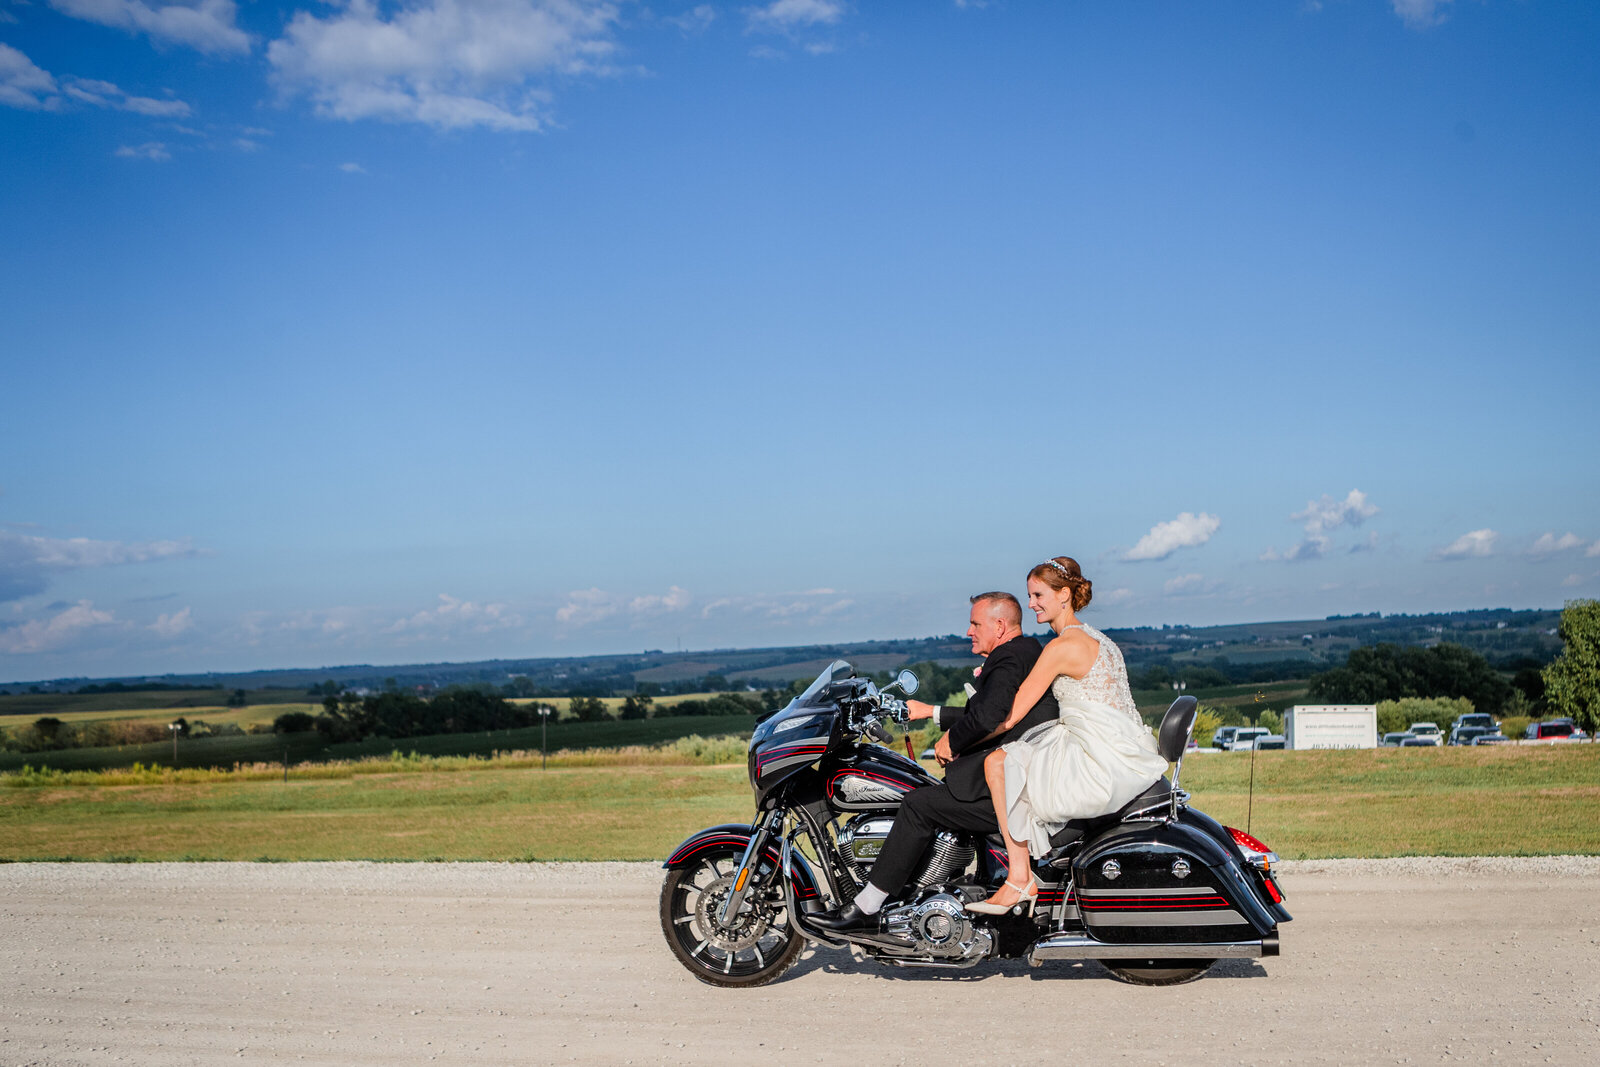 Bride and Groom on motorcycle with blue sky